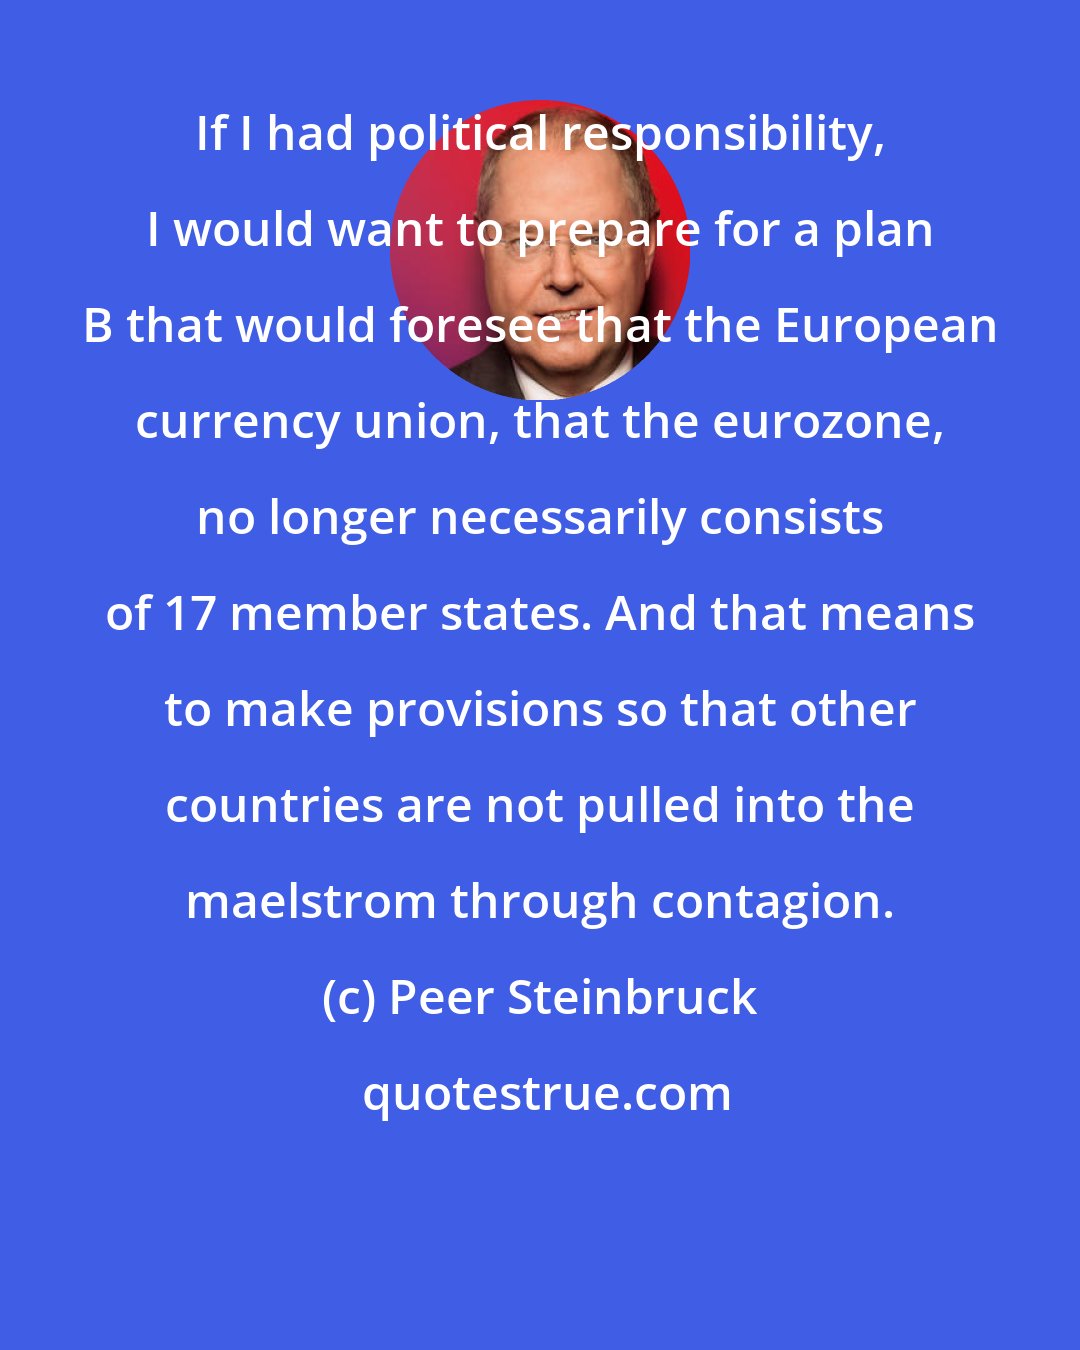 Peer Steinbruck: If I had political responsibility, I would want to prepare for a plan B that would foresee that the European currency union, that the eurozone, no longer necessarily consists of 17 member states. And that means to make provisions so that other countries are not pulled into the maelstrom through contagion.